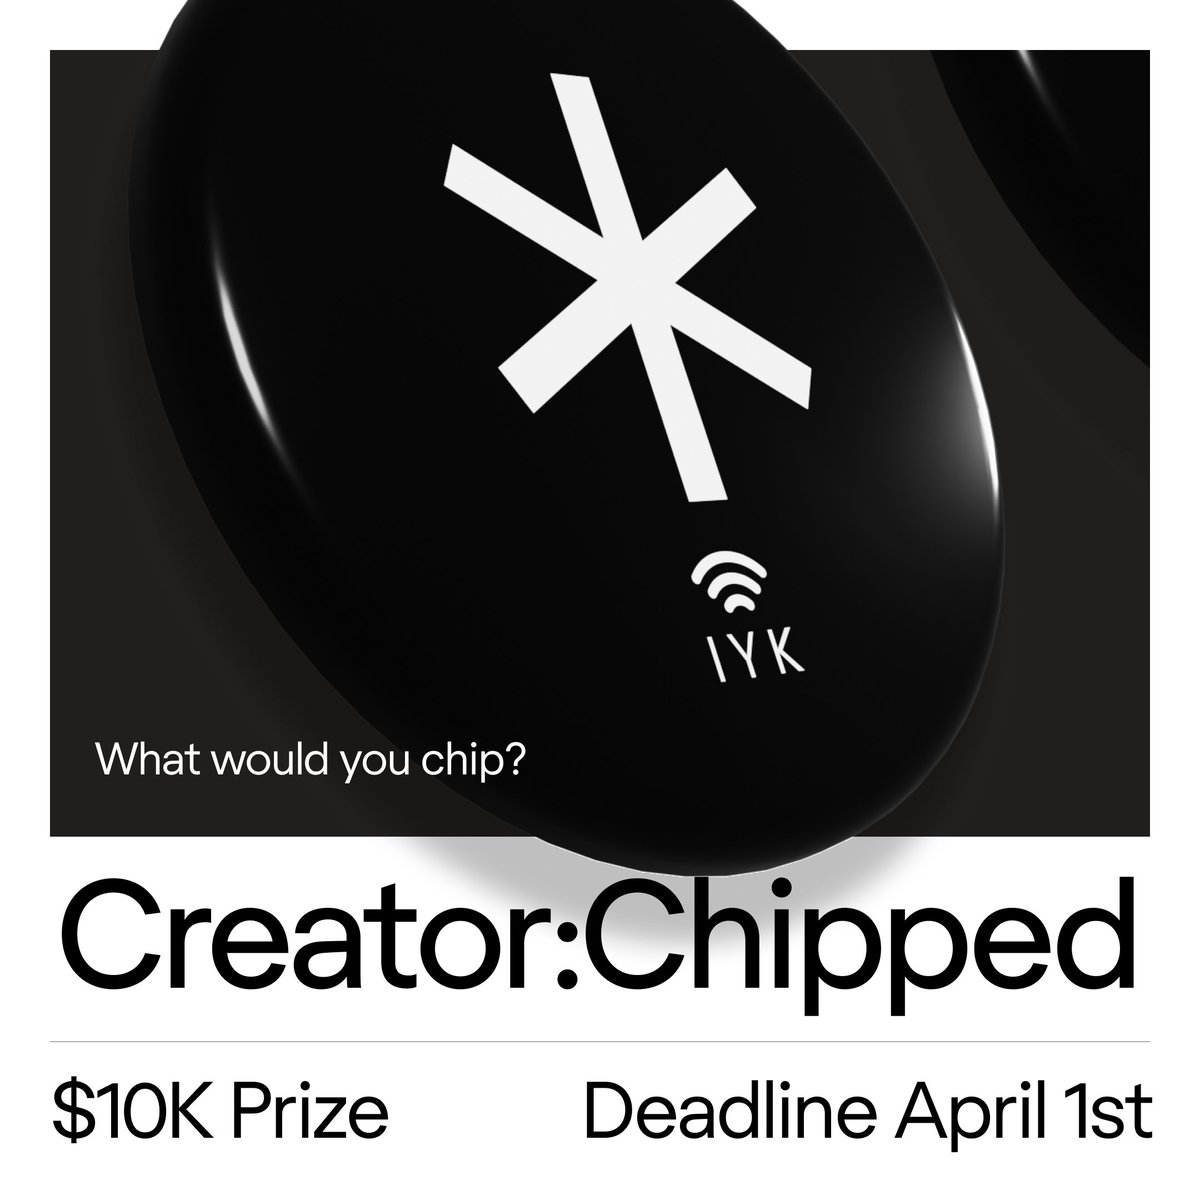 What would you chip if you had $10K? Introducing Creator:Chipped An open call for creators of tangible goods who would like to experiment with NFC chips. A single idea will have its production funded by IYK. IYK will curate submissions and the community will vote on a winner.…